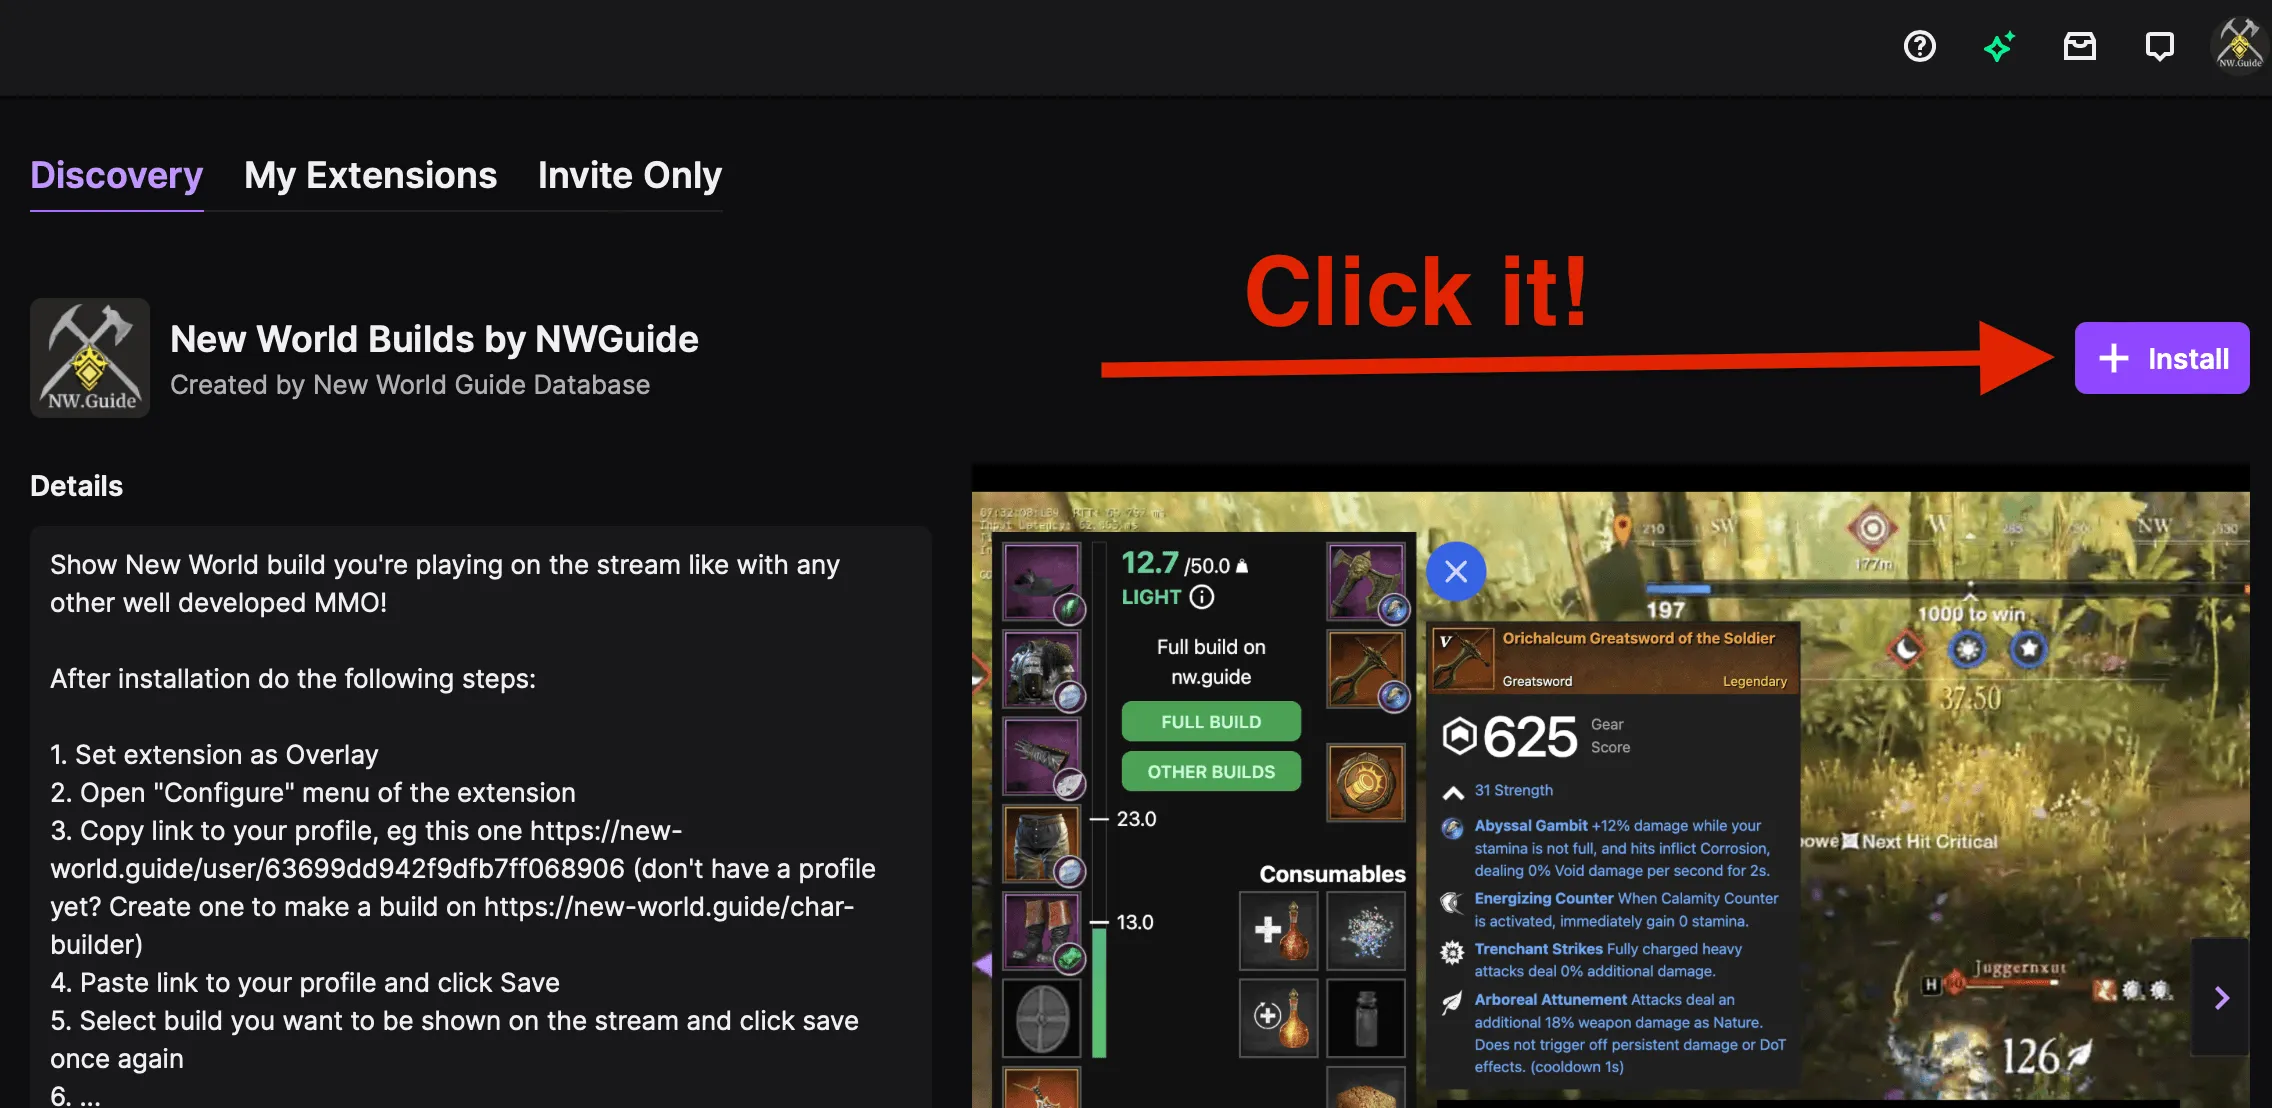 Click that "Install" button in order to install the extension for your Twitch channel